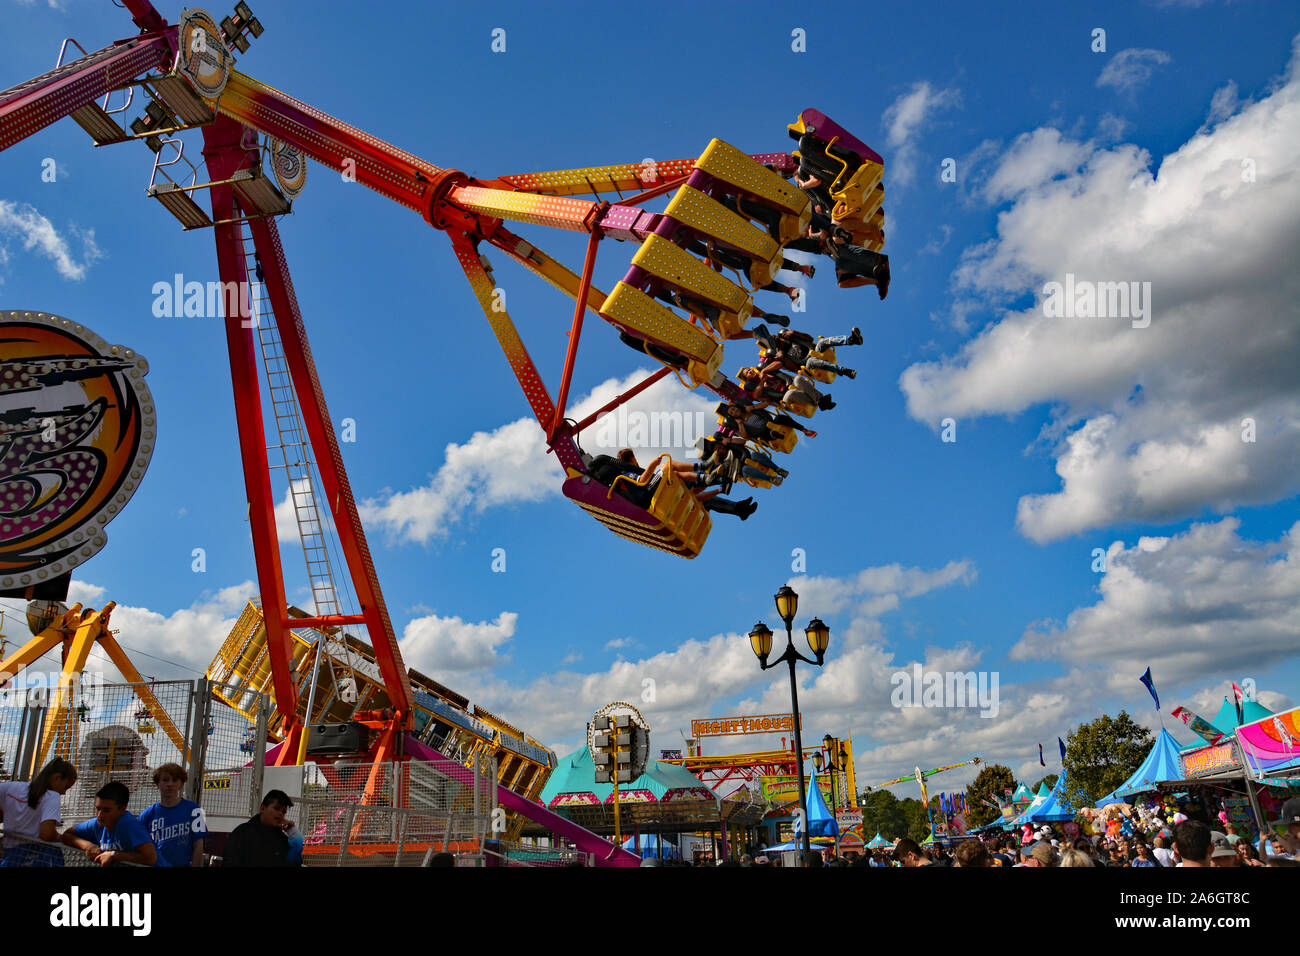 North carolina state fair rides hires stock photography and images Alamy